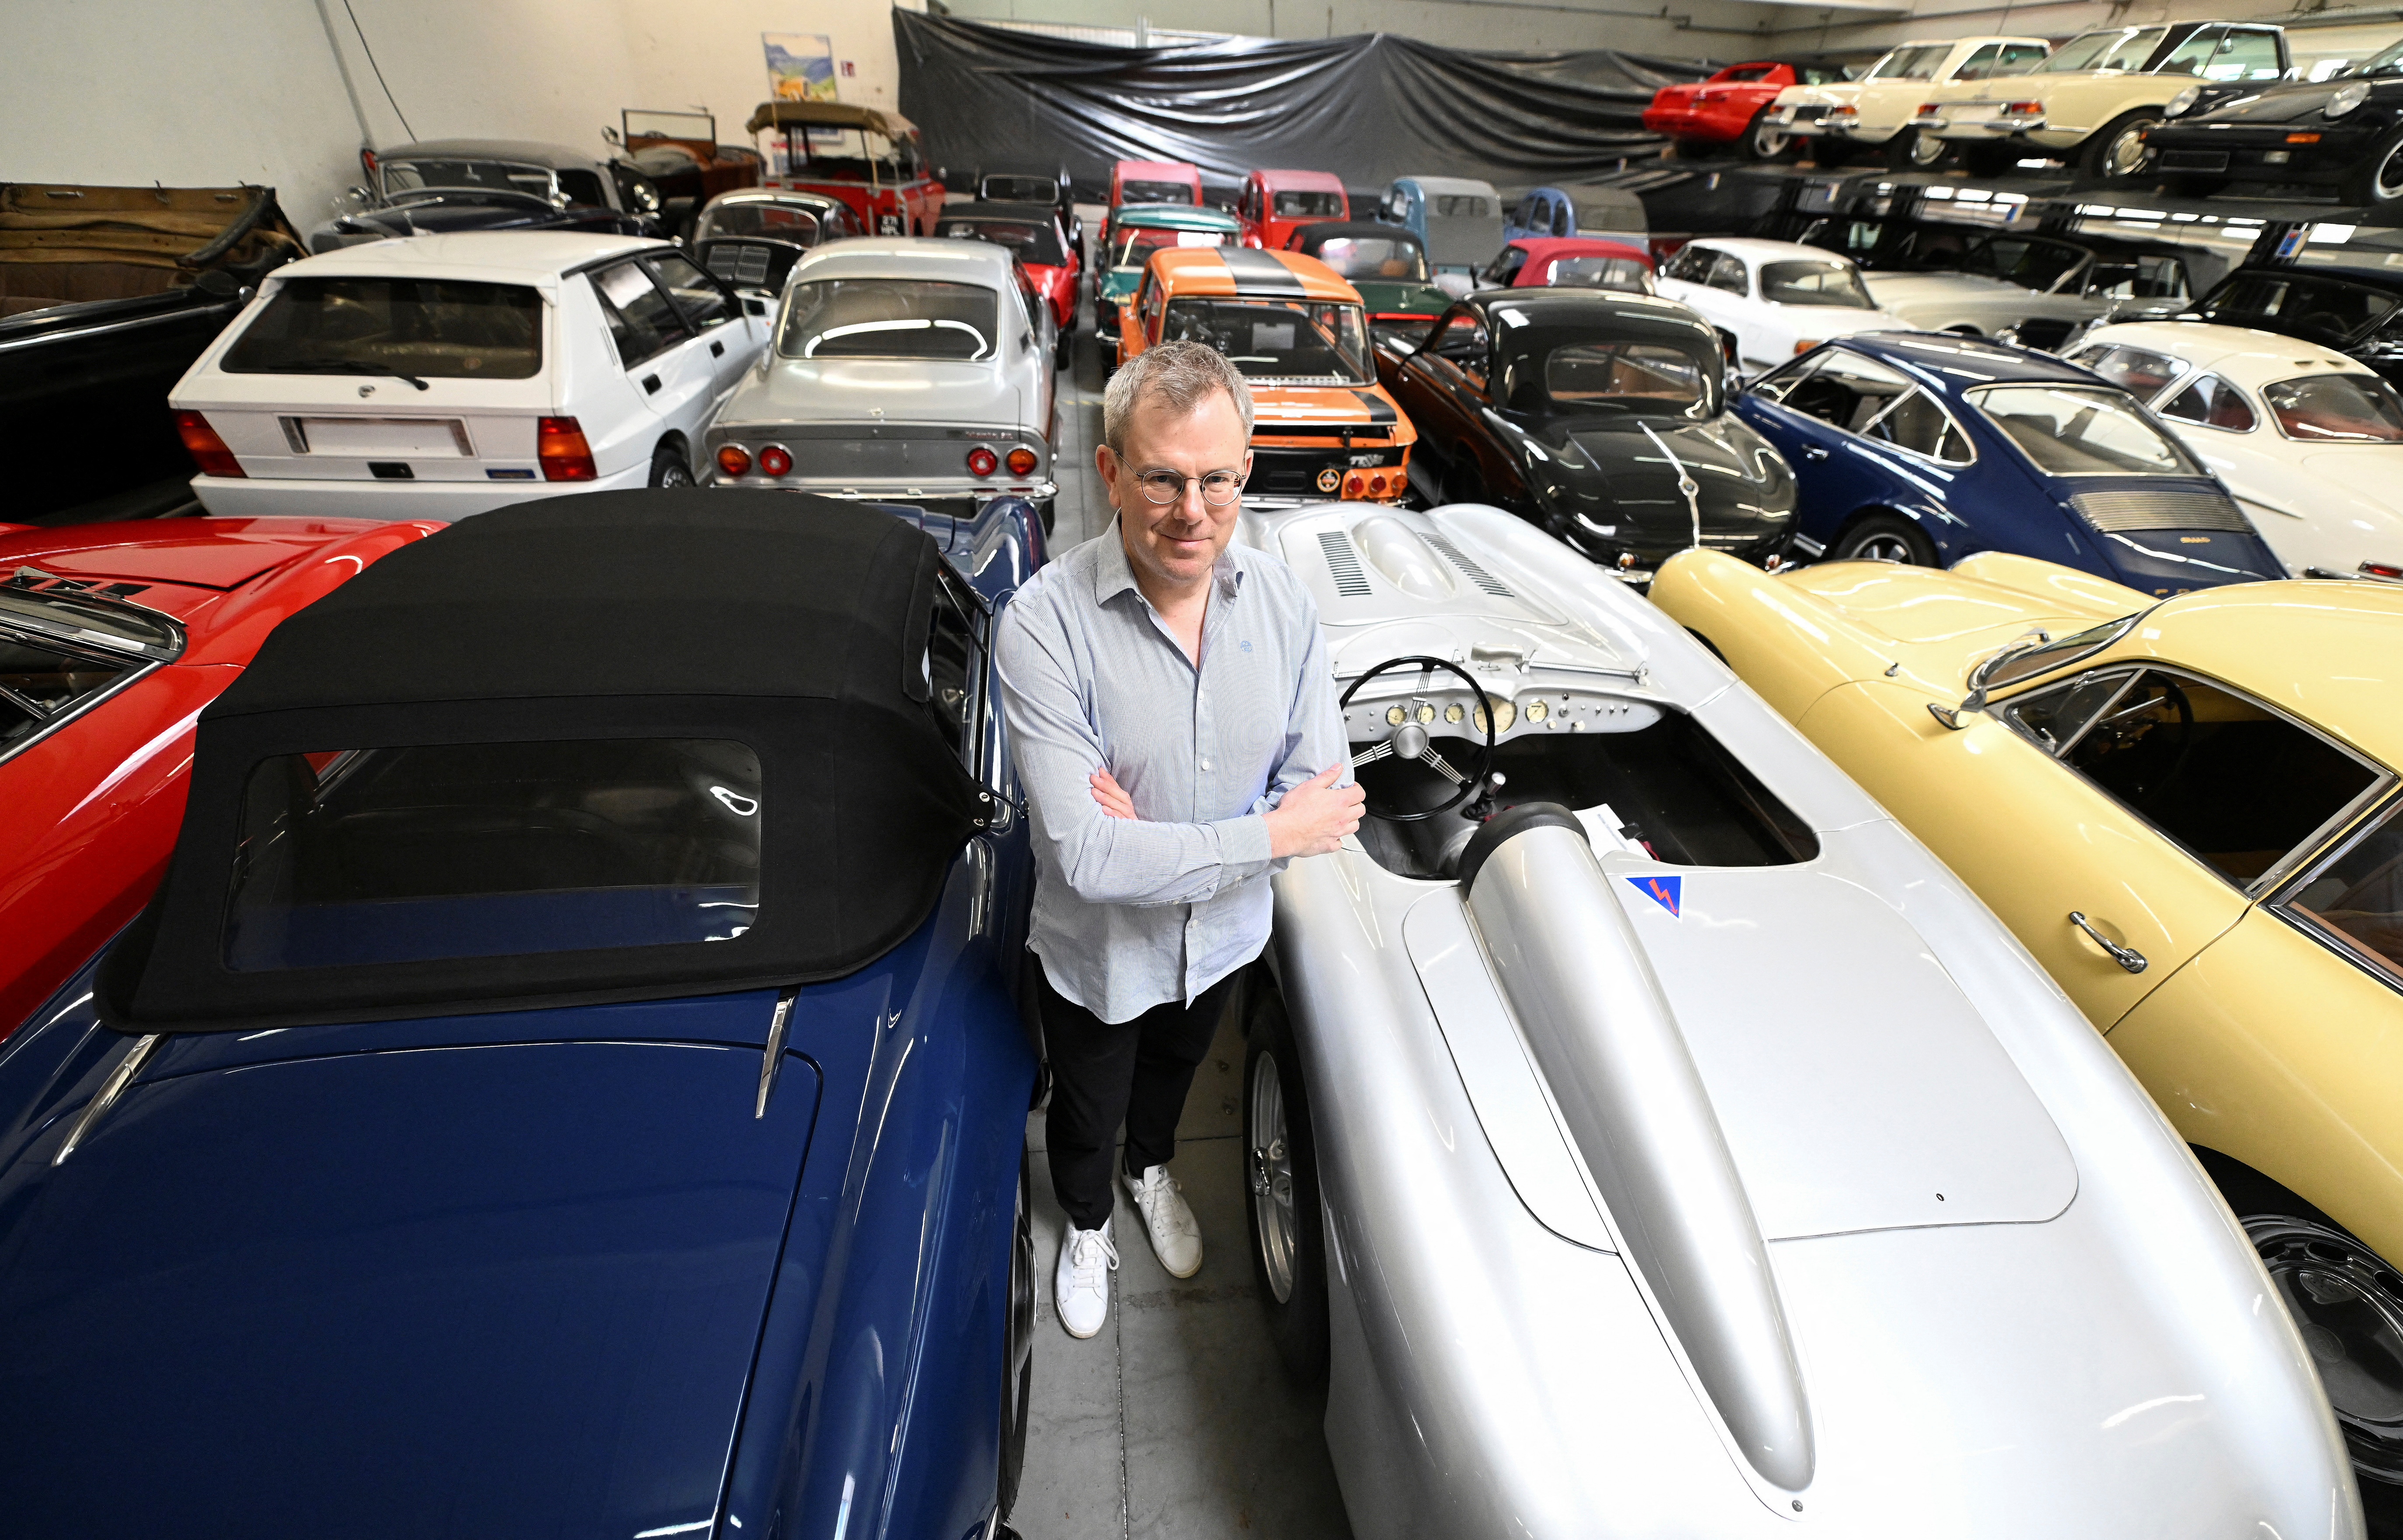 Collection cars draw increasing intrerest from funds as green transition creates cult objects